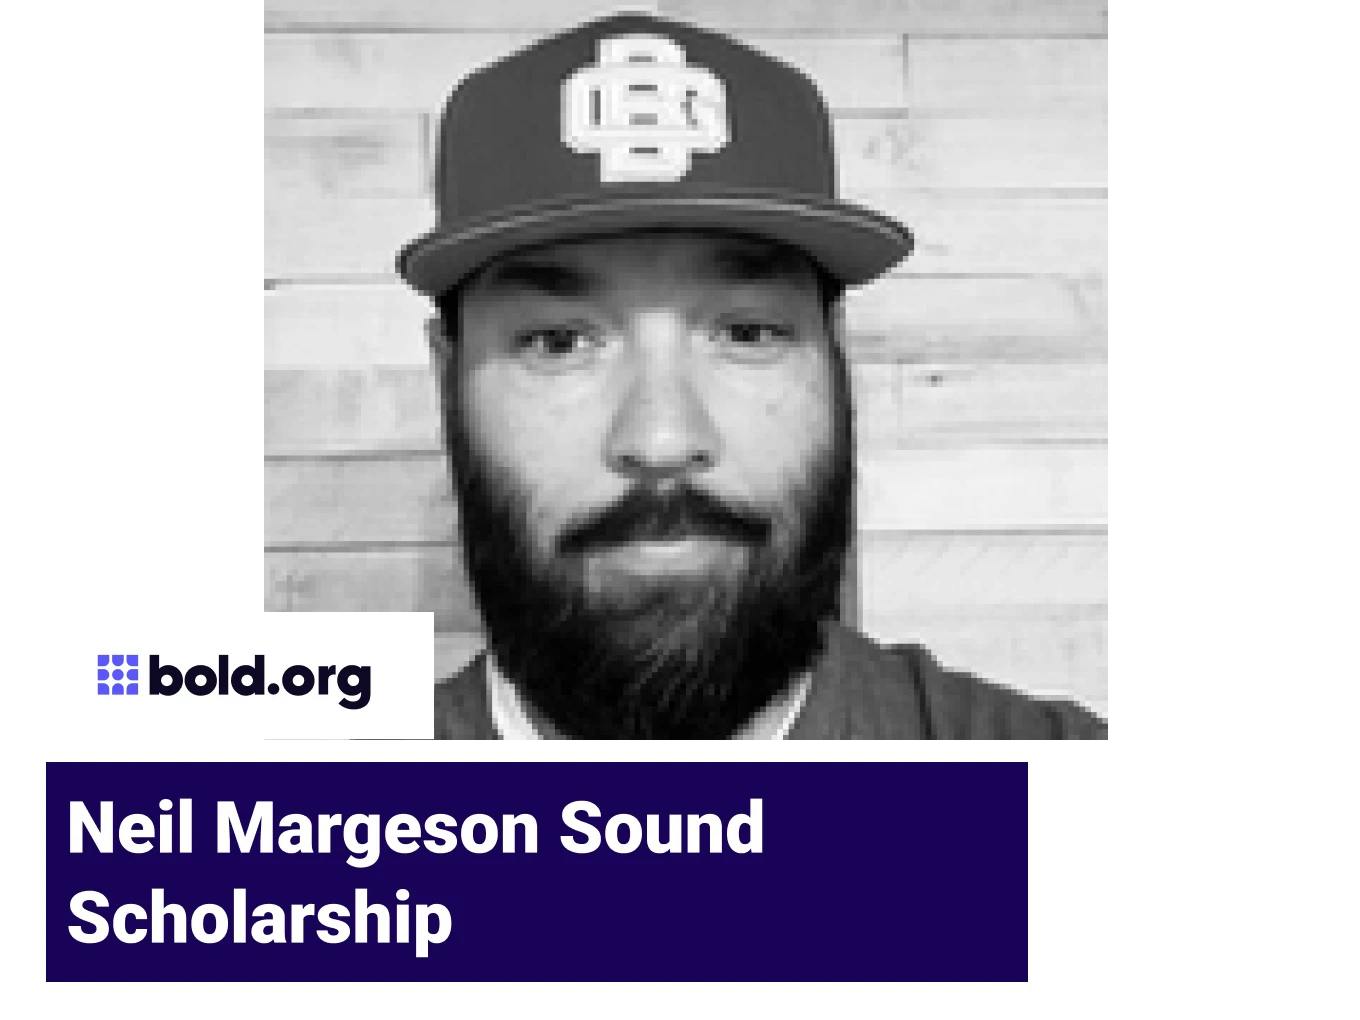 Neil Margeson Sound Scholarship